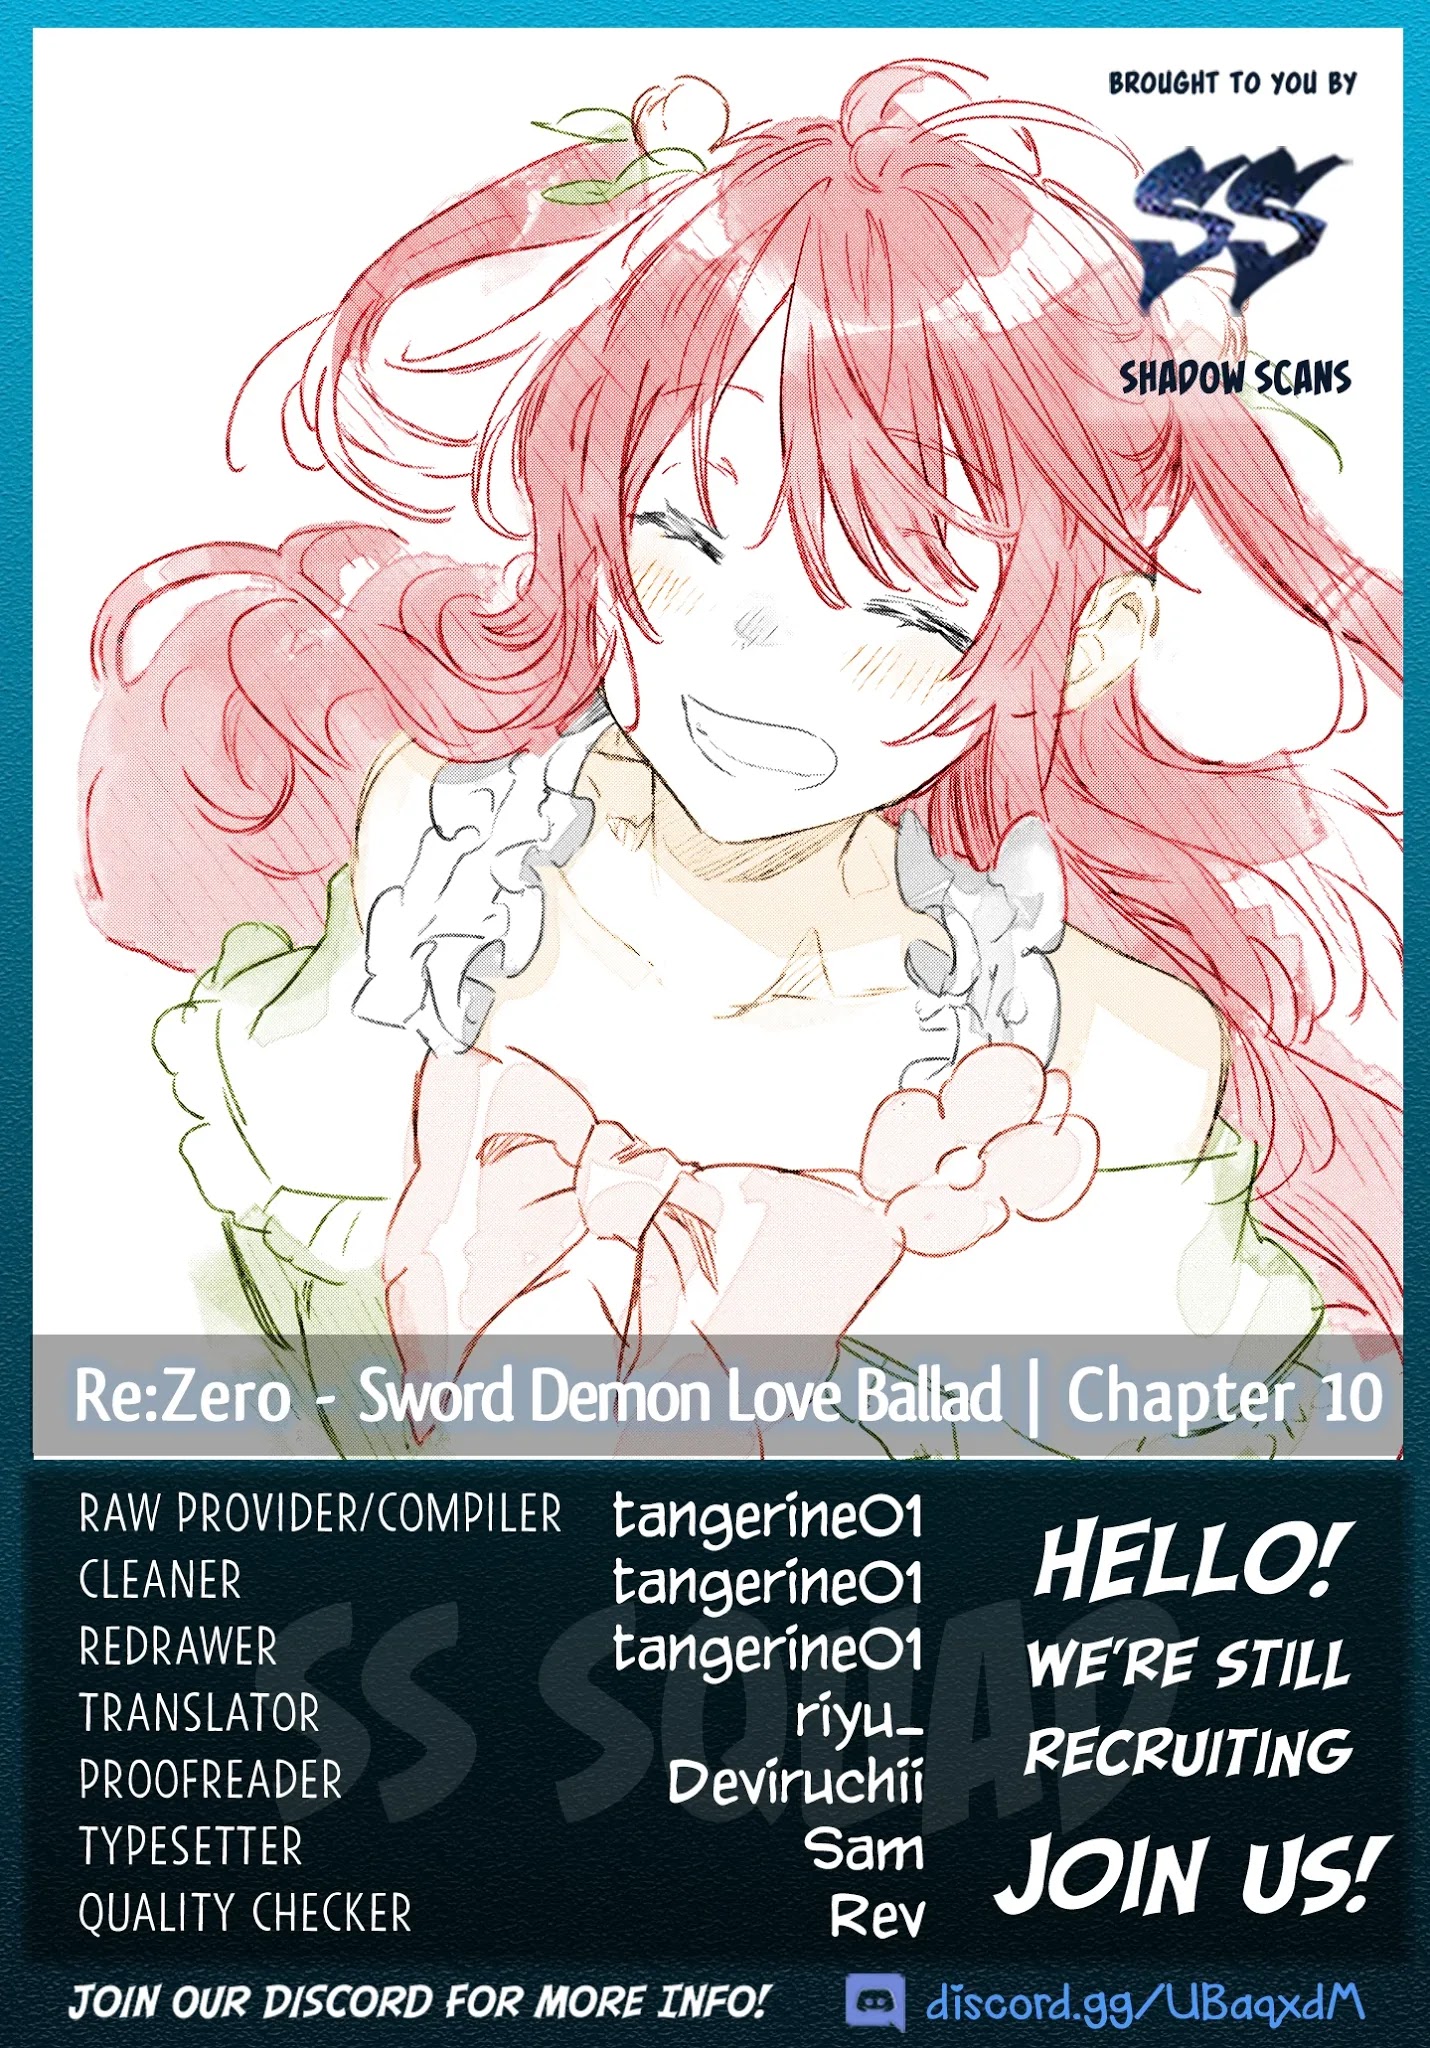 Re: Starting Life In Another World From Zero: Sword Demon Love Ballad Chapter 10